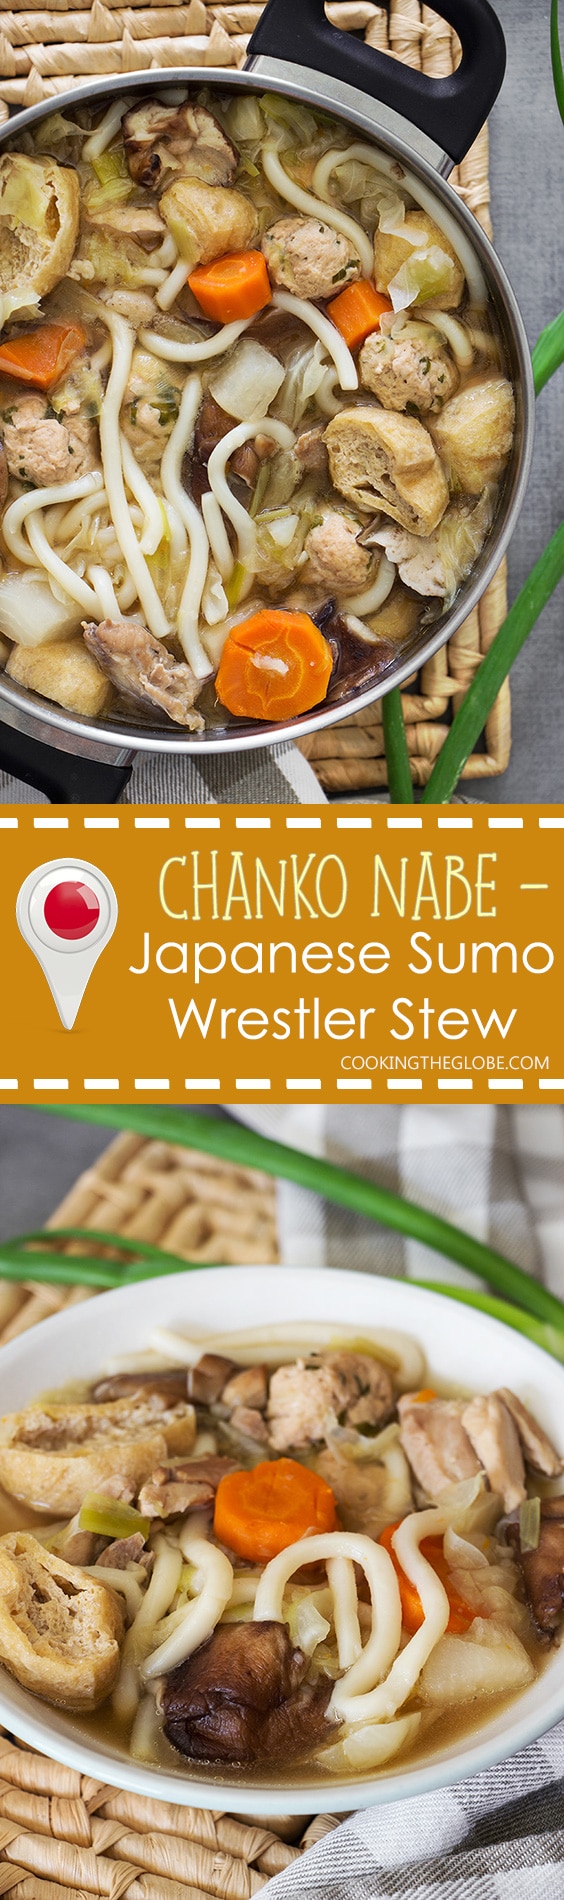 Chanko Nabe is a filling stew usually eaten by sumo wrestlers in Japan. Cooked in a flavorful broth and packed with protein and veggies, it's super healthy and comforting! | cookingtheglobe.com